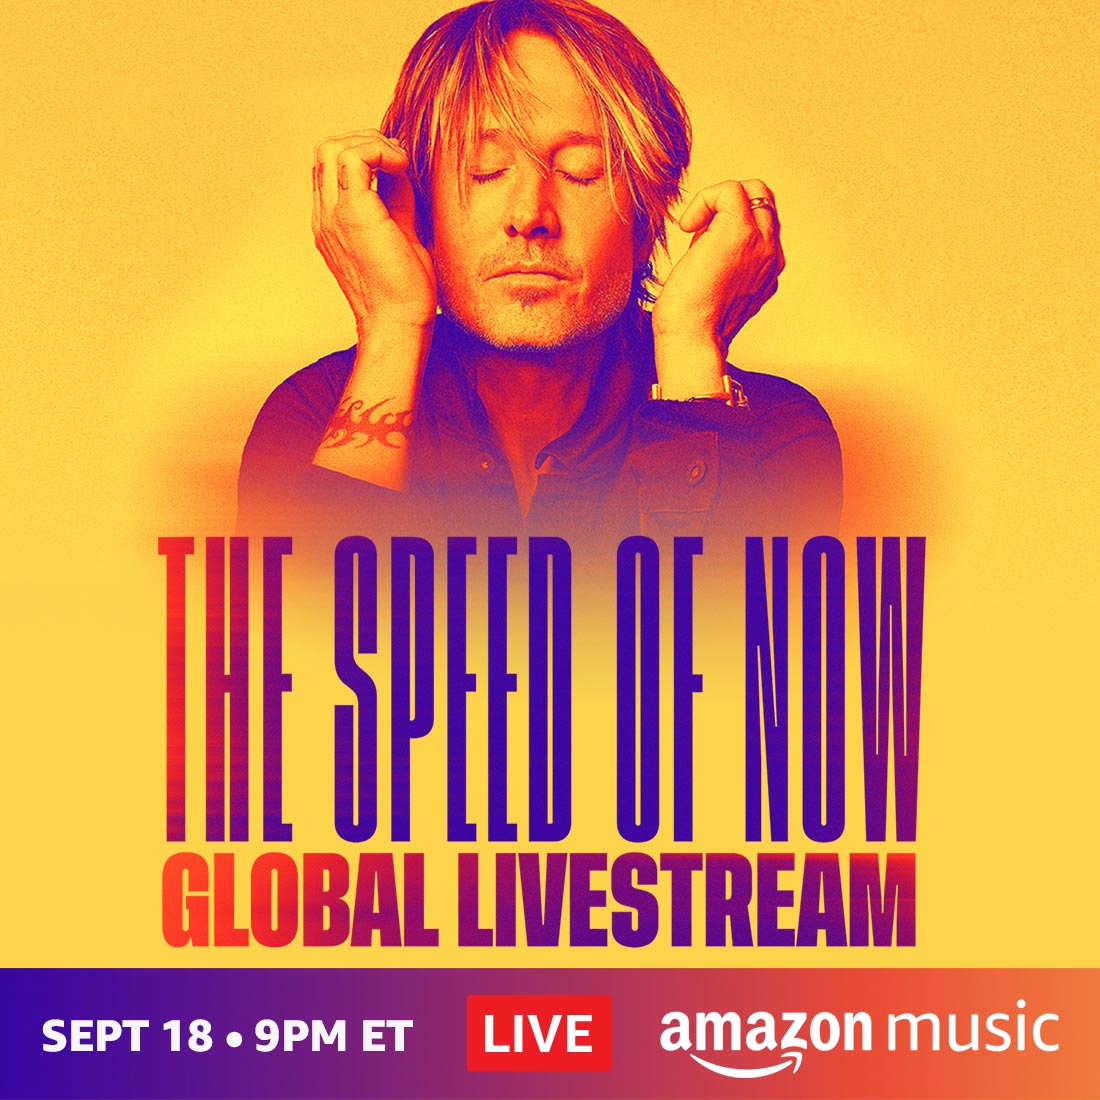 THE SPEED OF NOW - Global Livestream